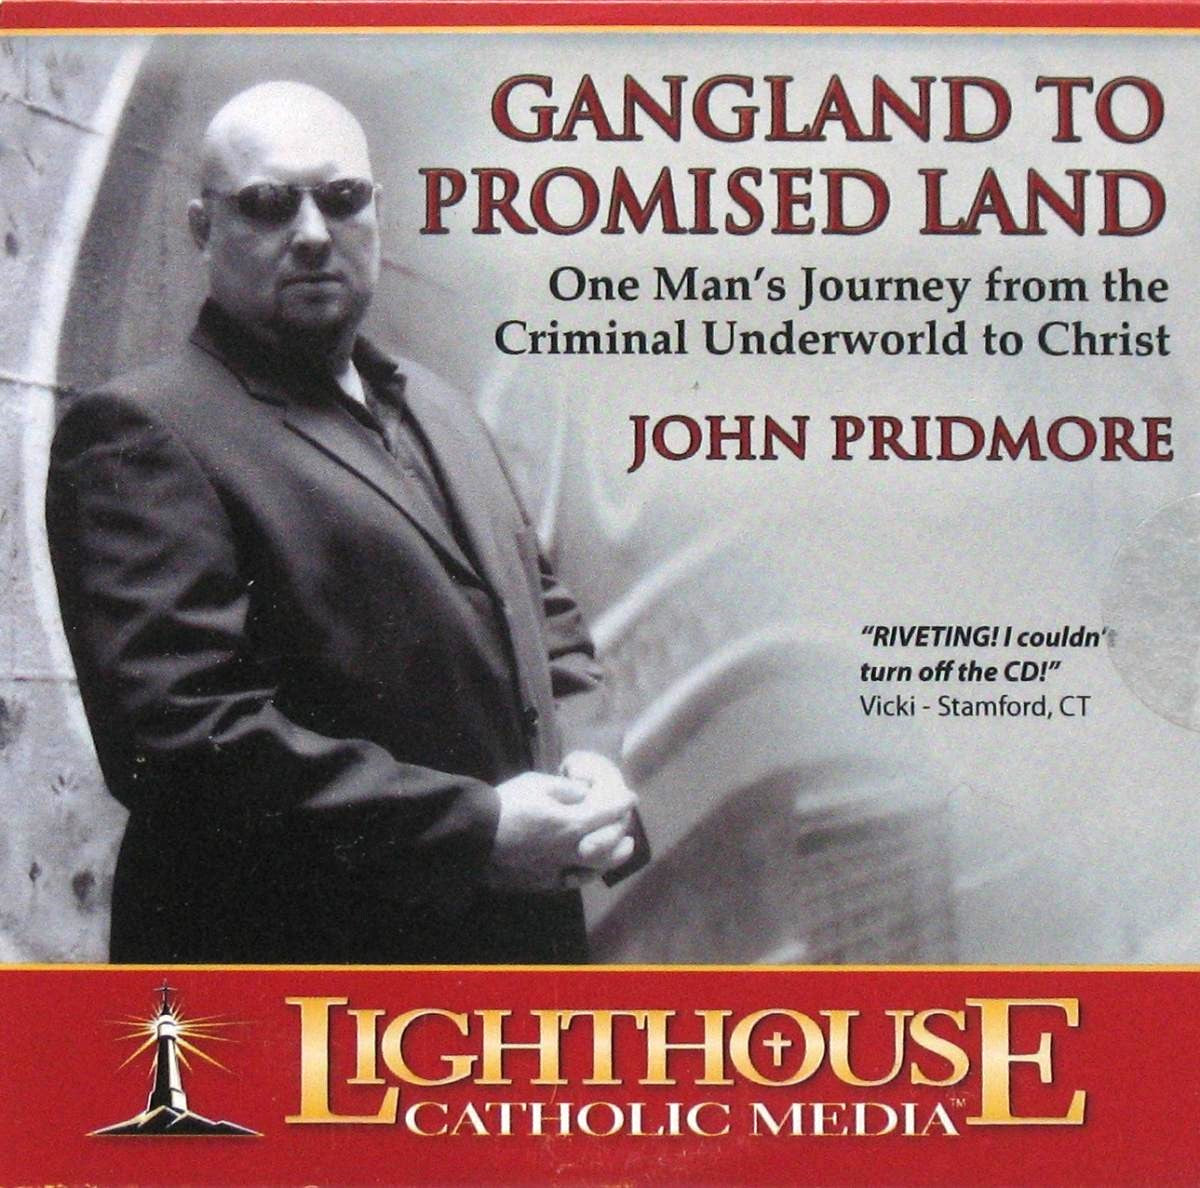 Gangland to Promised Land:  from Criminal Underworld to Christ - CD Talk by John Pridmore